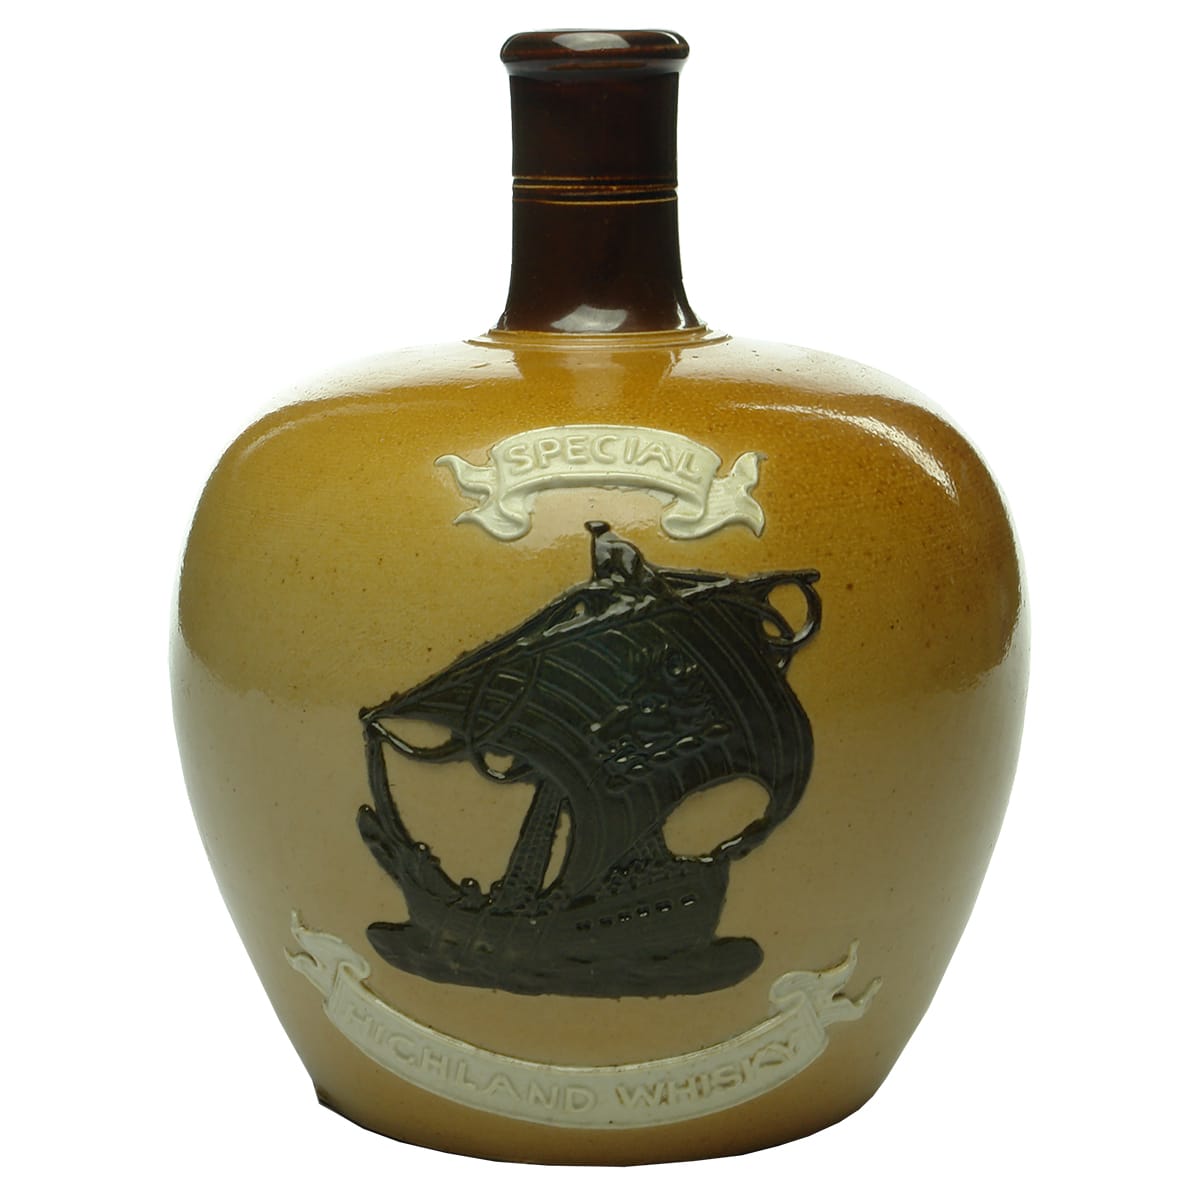 Whisky Jug. Galley of Lorne, Special Highland Whisky. Royal Doulton.